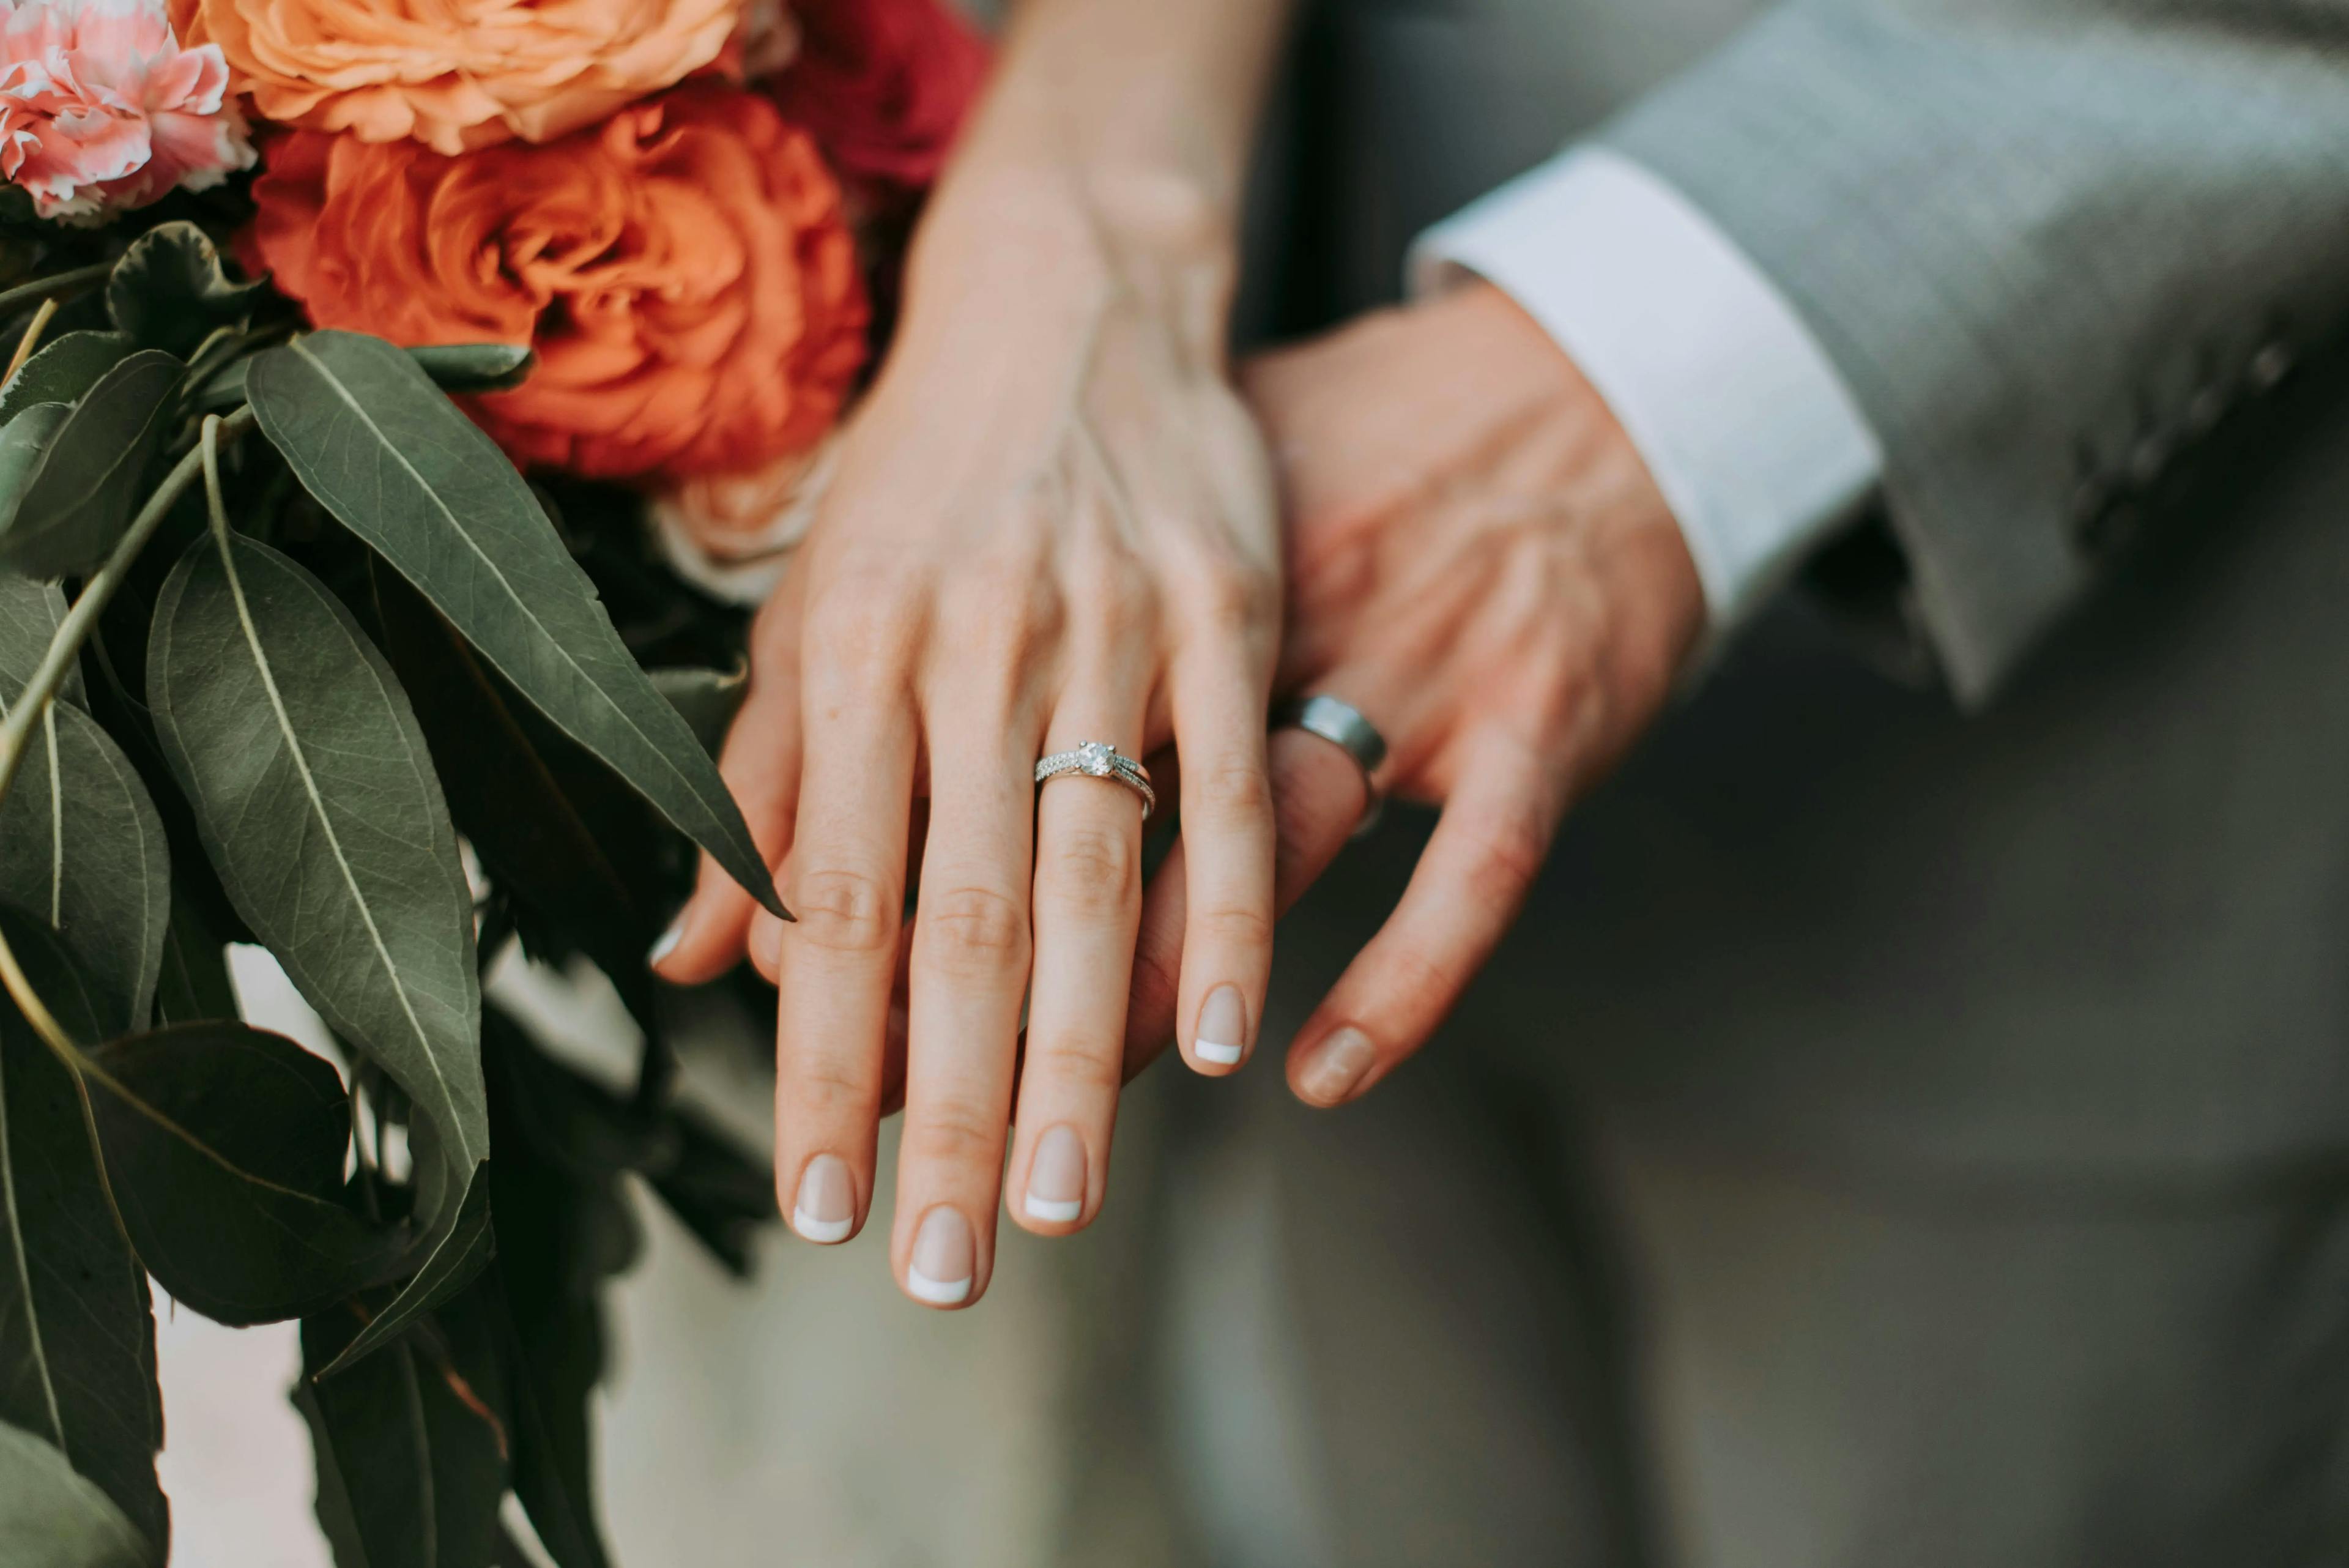 A close-up of the hands of a bride and groom, symbolizing their union and commitment on their wedding day.